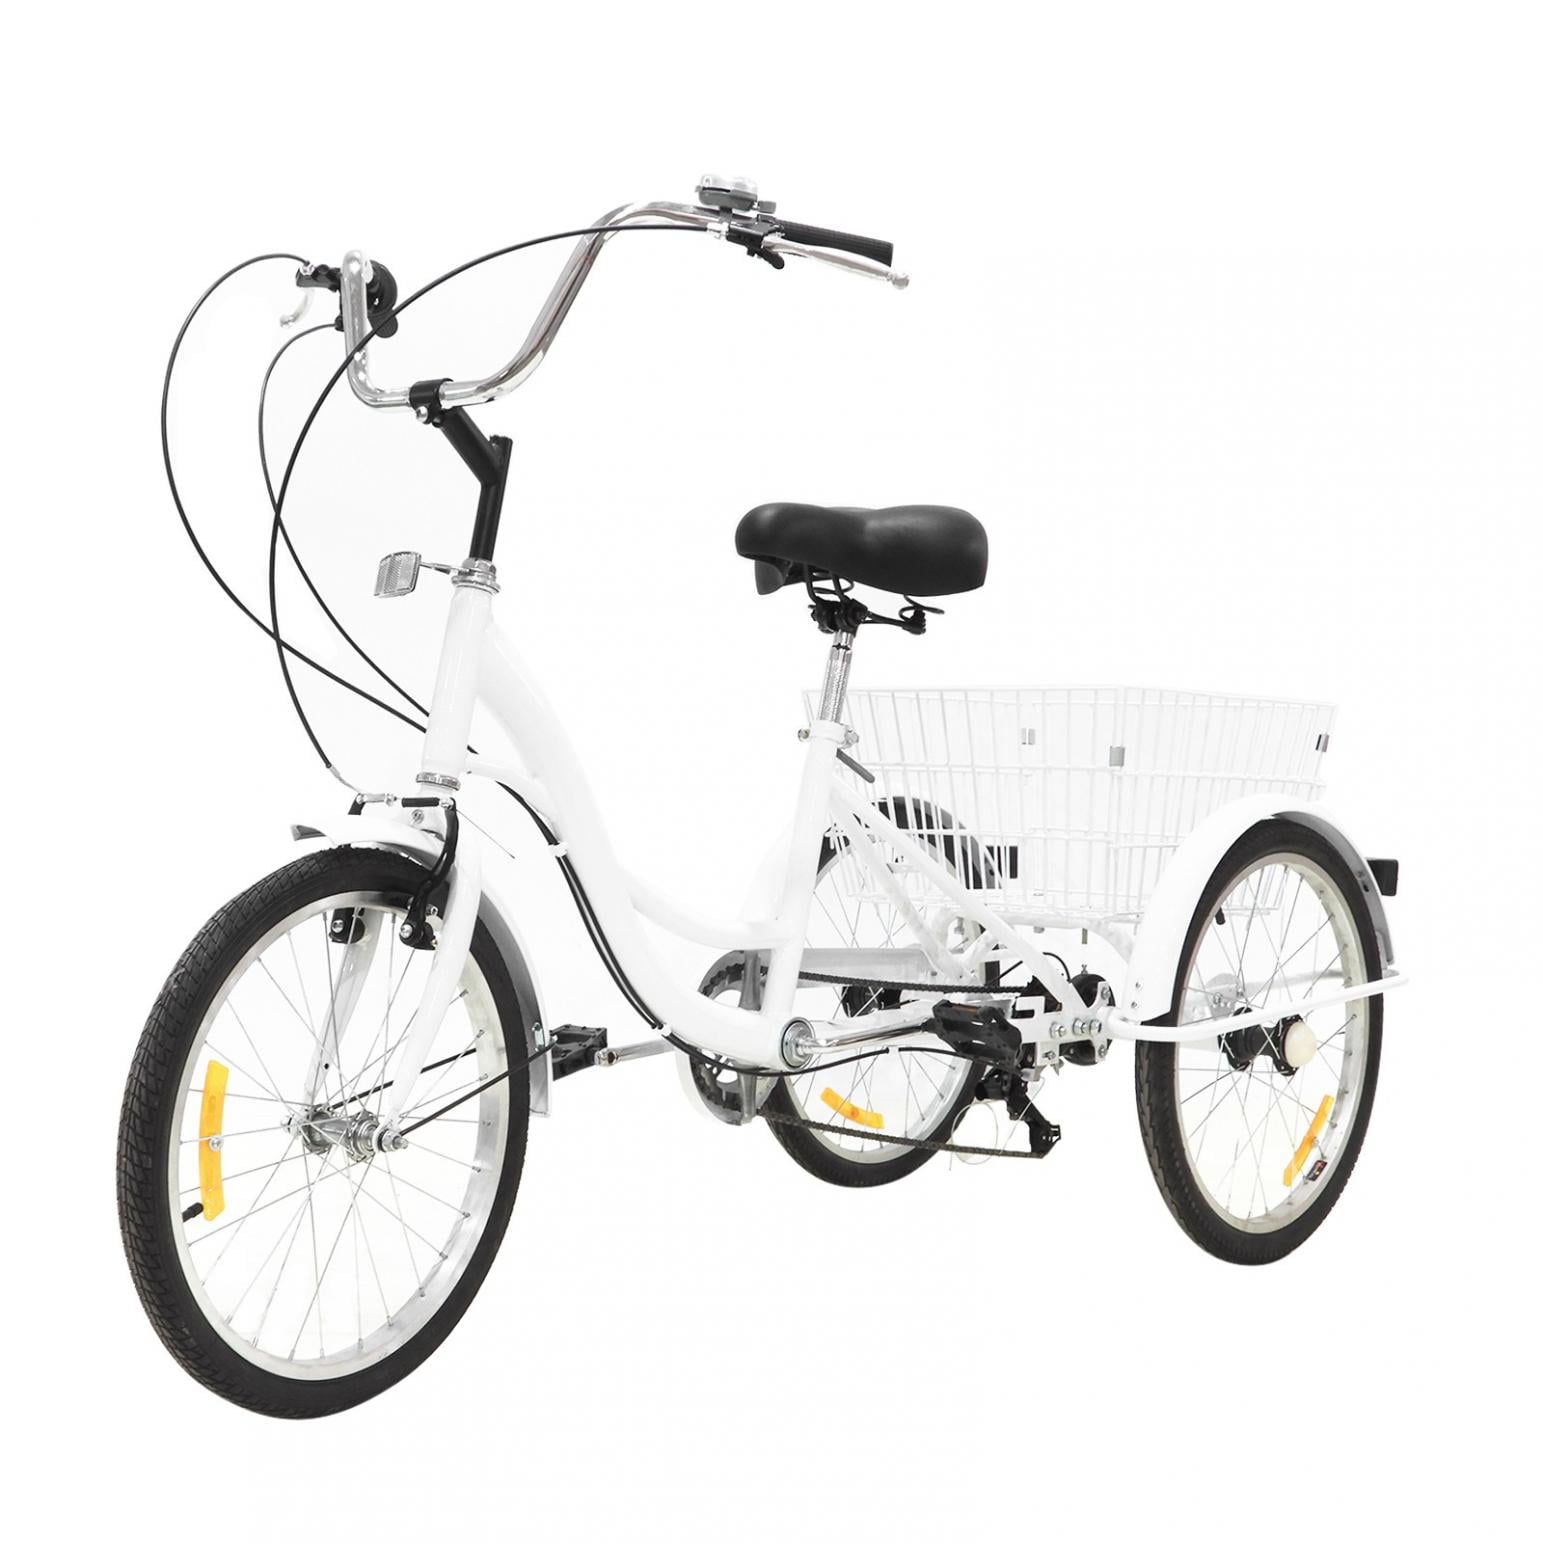 16 inch 3Wheel 1Speed Tricycle Bicycle Trike w/Shopping&Pet Basket For Adult/Kid 